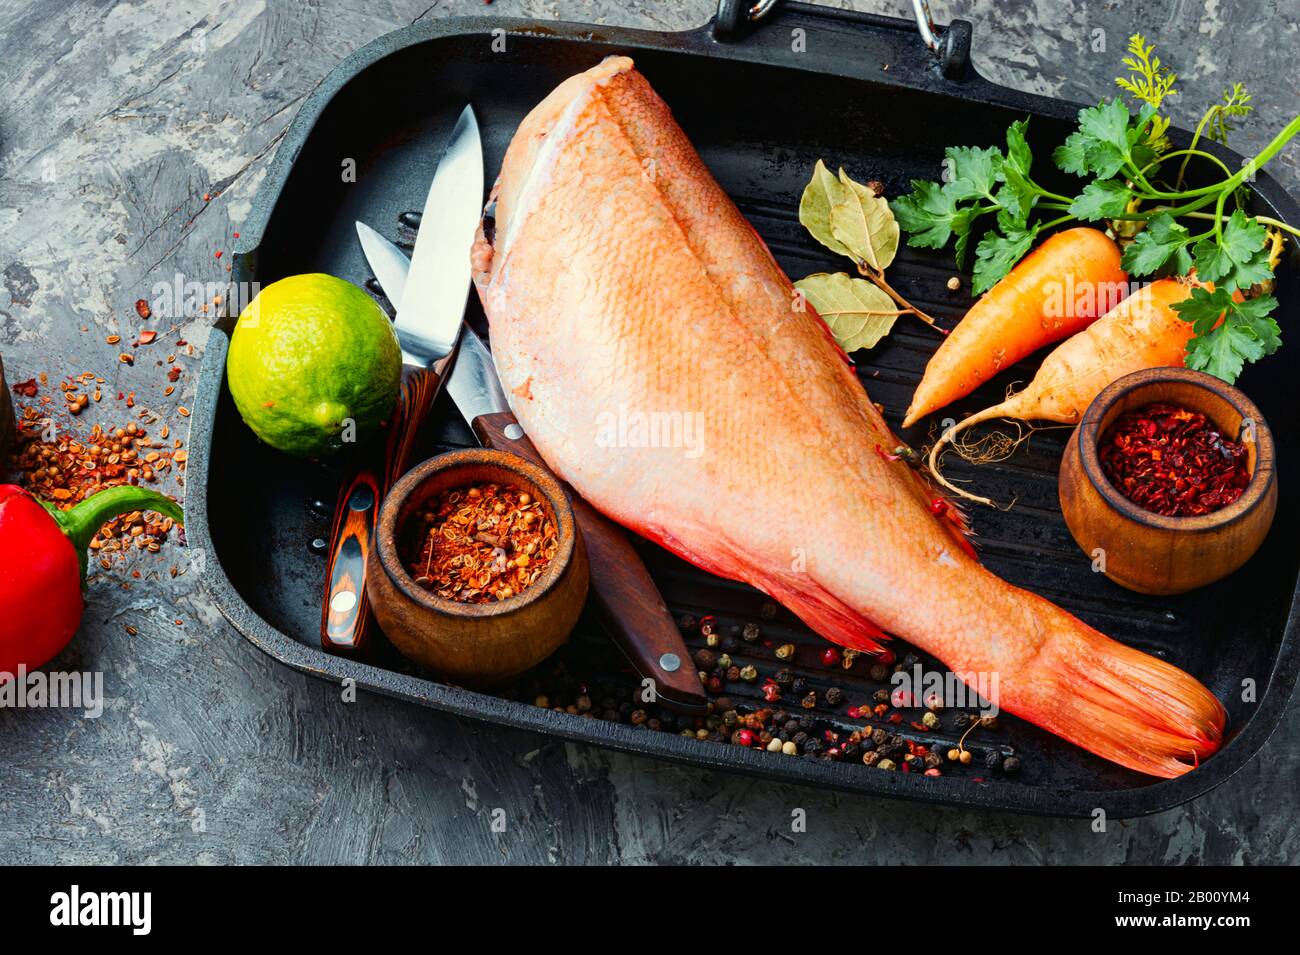 Whole raw fresh red perch or seabass. Stock Photo